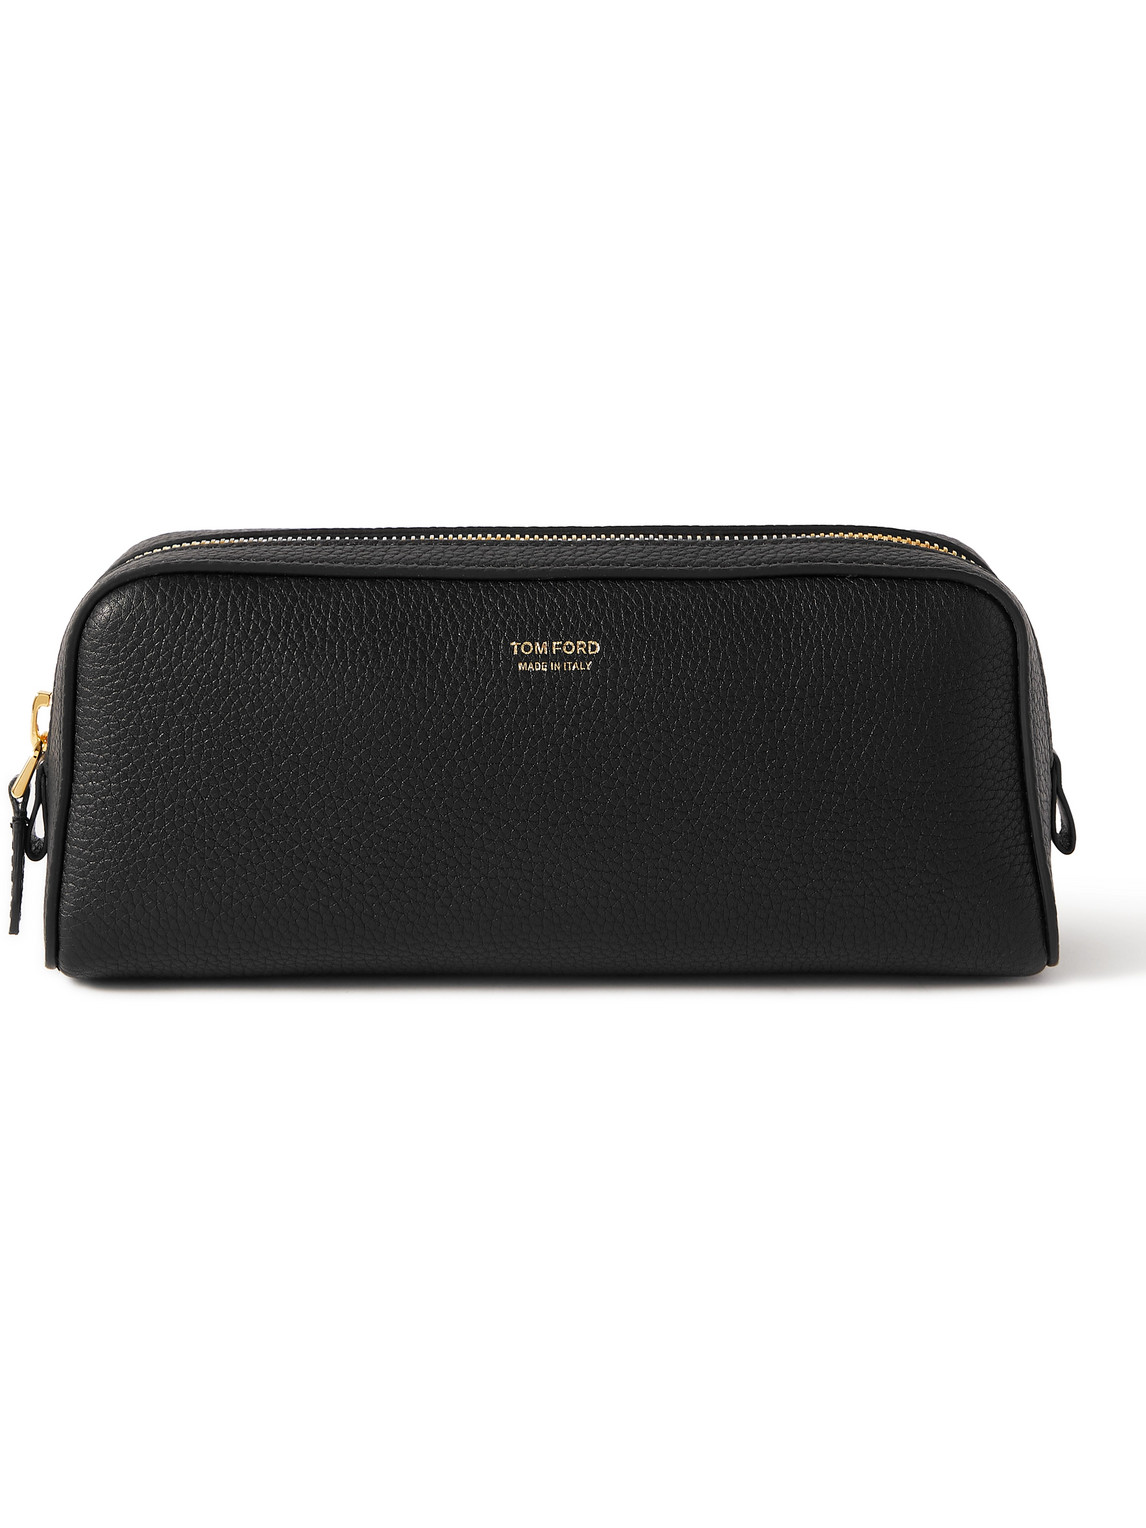 Mens Bags Toiletry bags and wash bags Tom Ford Full-grain Leather Wash Bag in Black for Men 